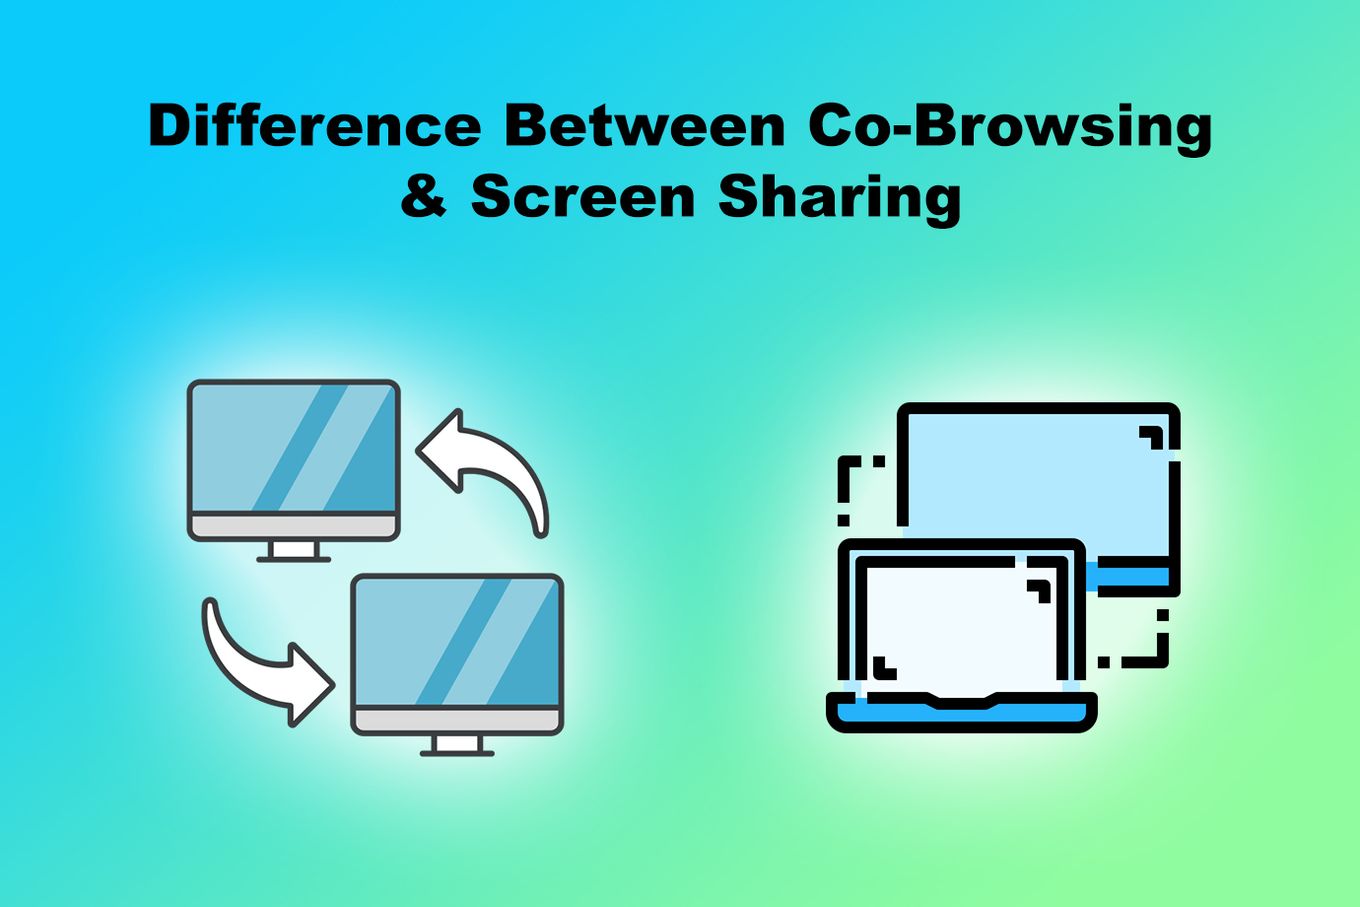 Difference Between Co-Browsing and Screen Sharing